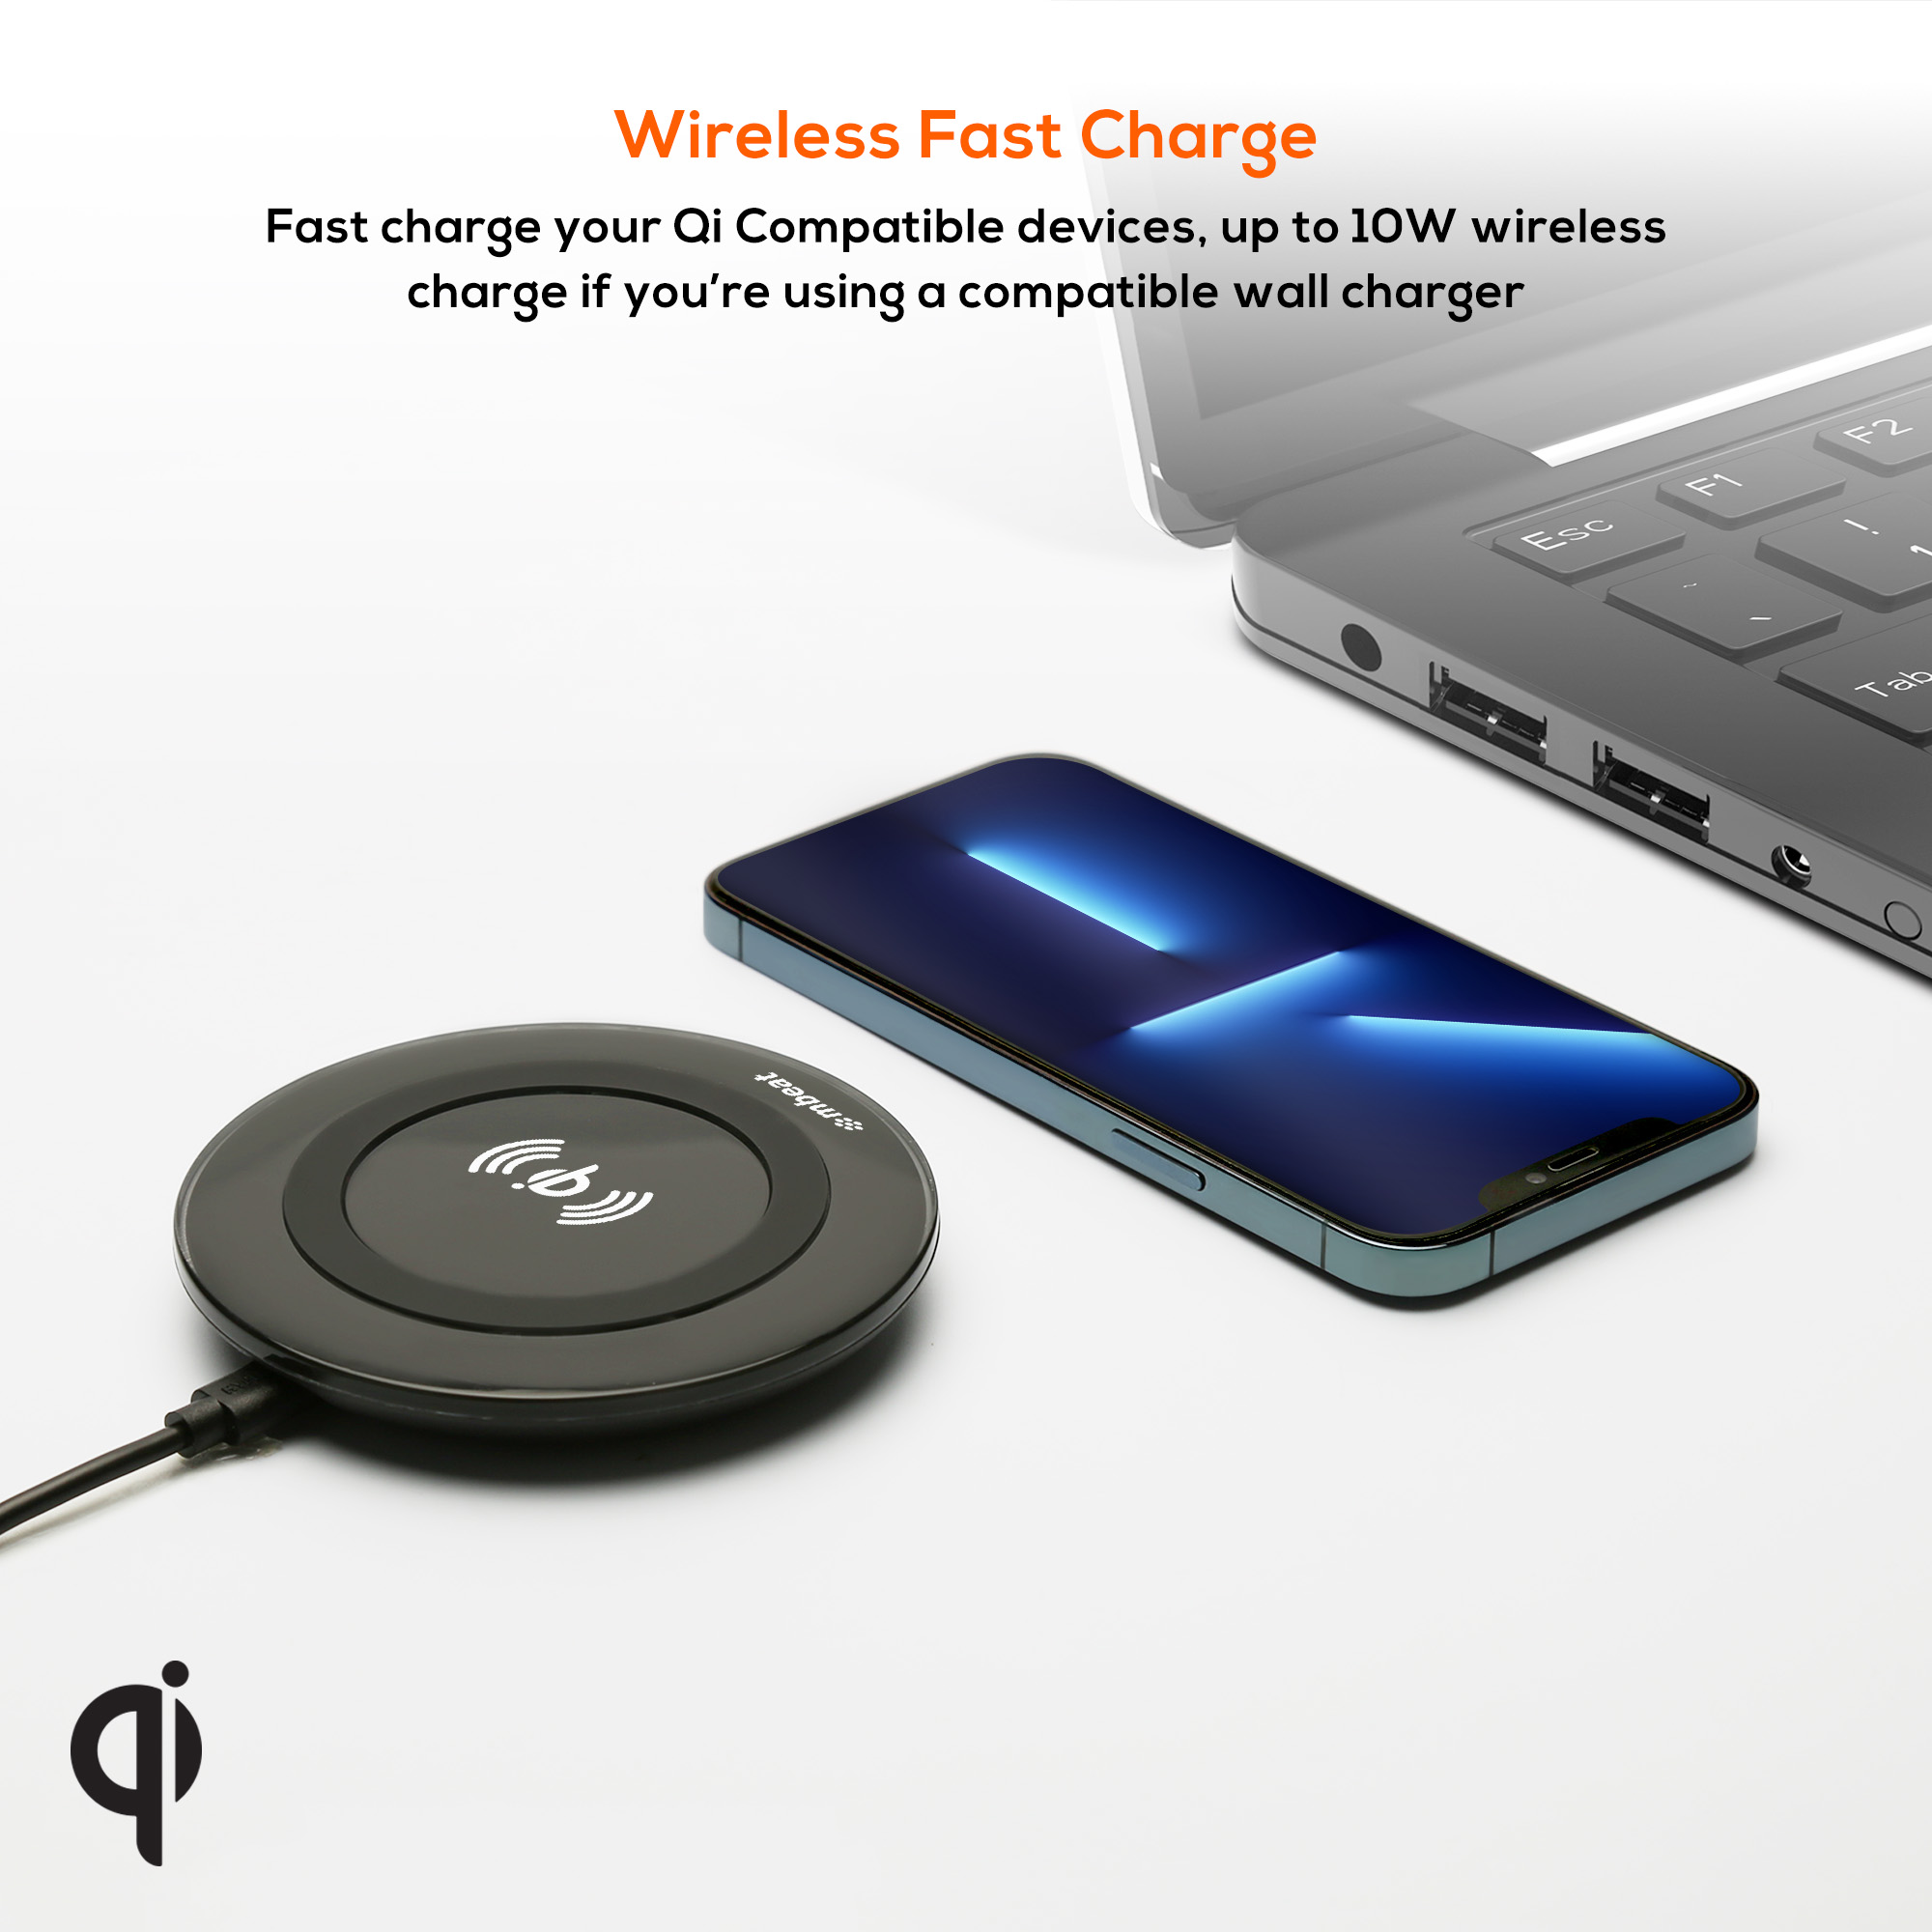 A large marketing image providing additional information about the product mbeat Gorilla Power 10W Qi Certified Wireless Charging Pad - Additional alt info not provided